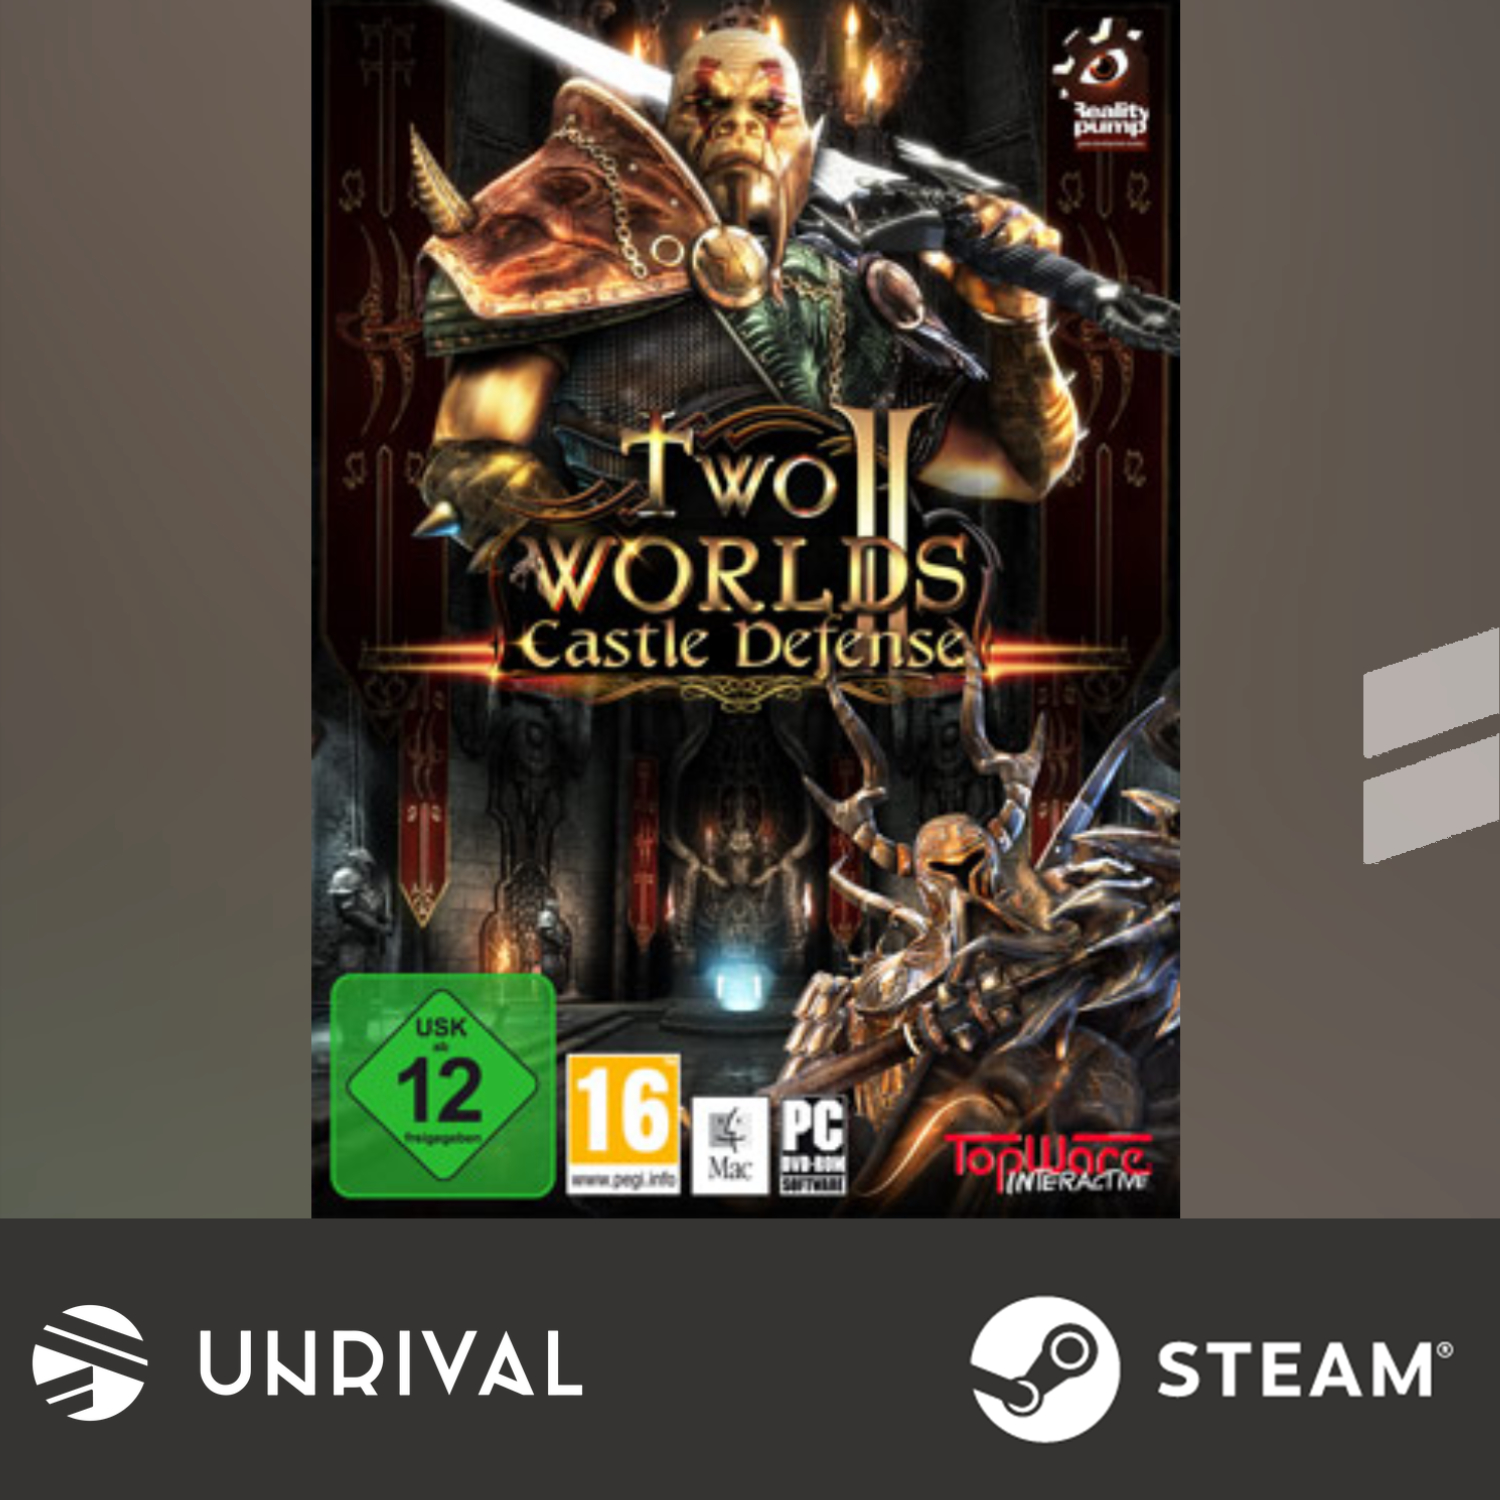 Two Worlds II: castle defense PC Digital Download Game - Unrival